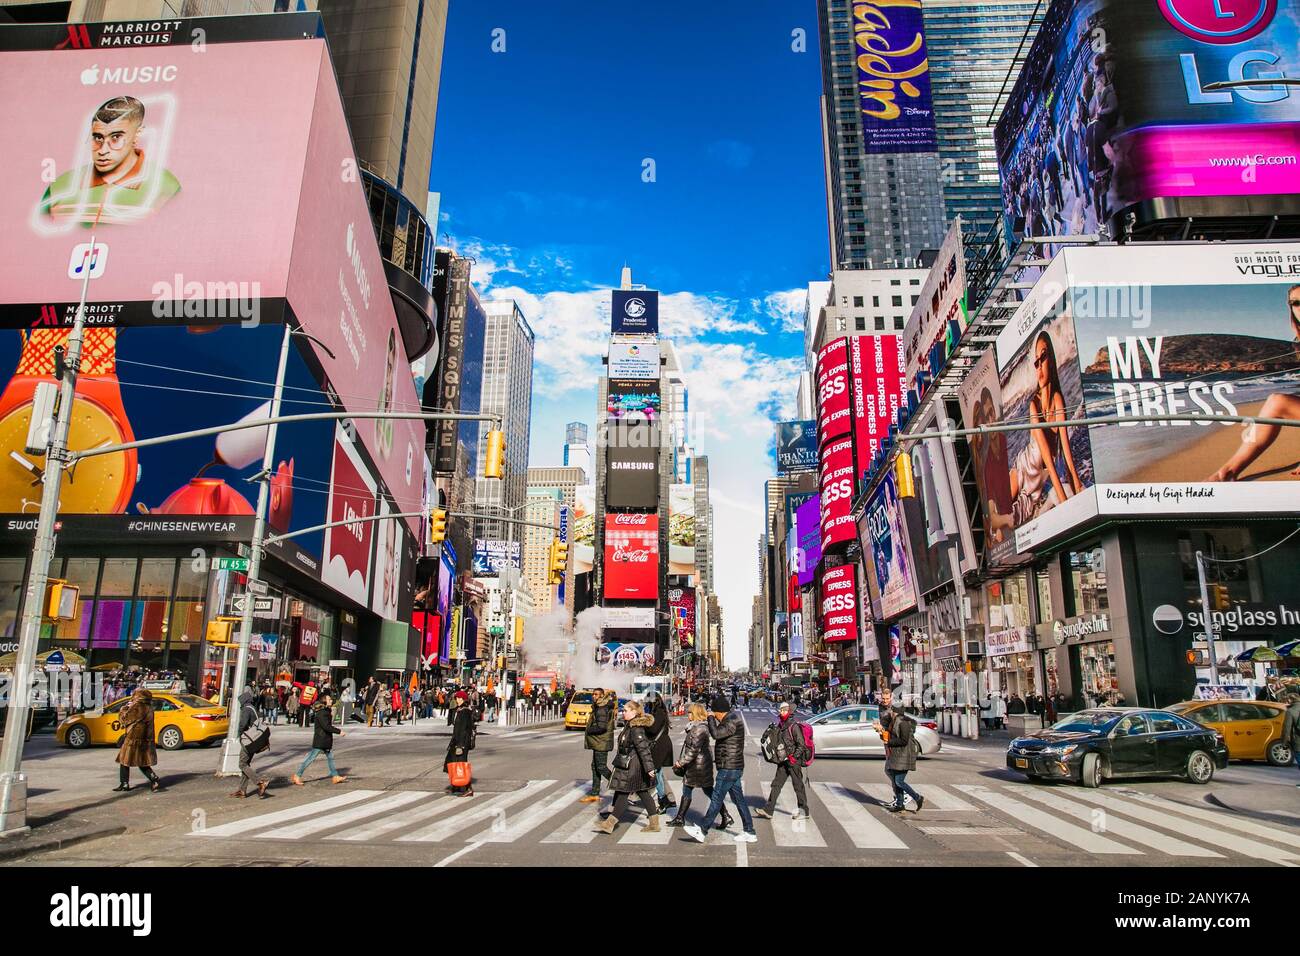 New York City, Usa-Jan 13, 2019: Times Square, featured with Broadway Theaters and LED signs, is a symbol of New York City, Manhattan. New York City. Stock Photo